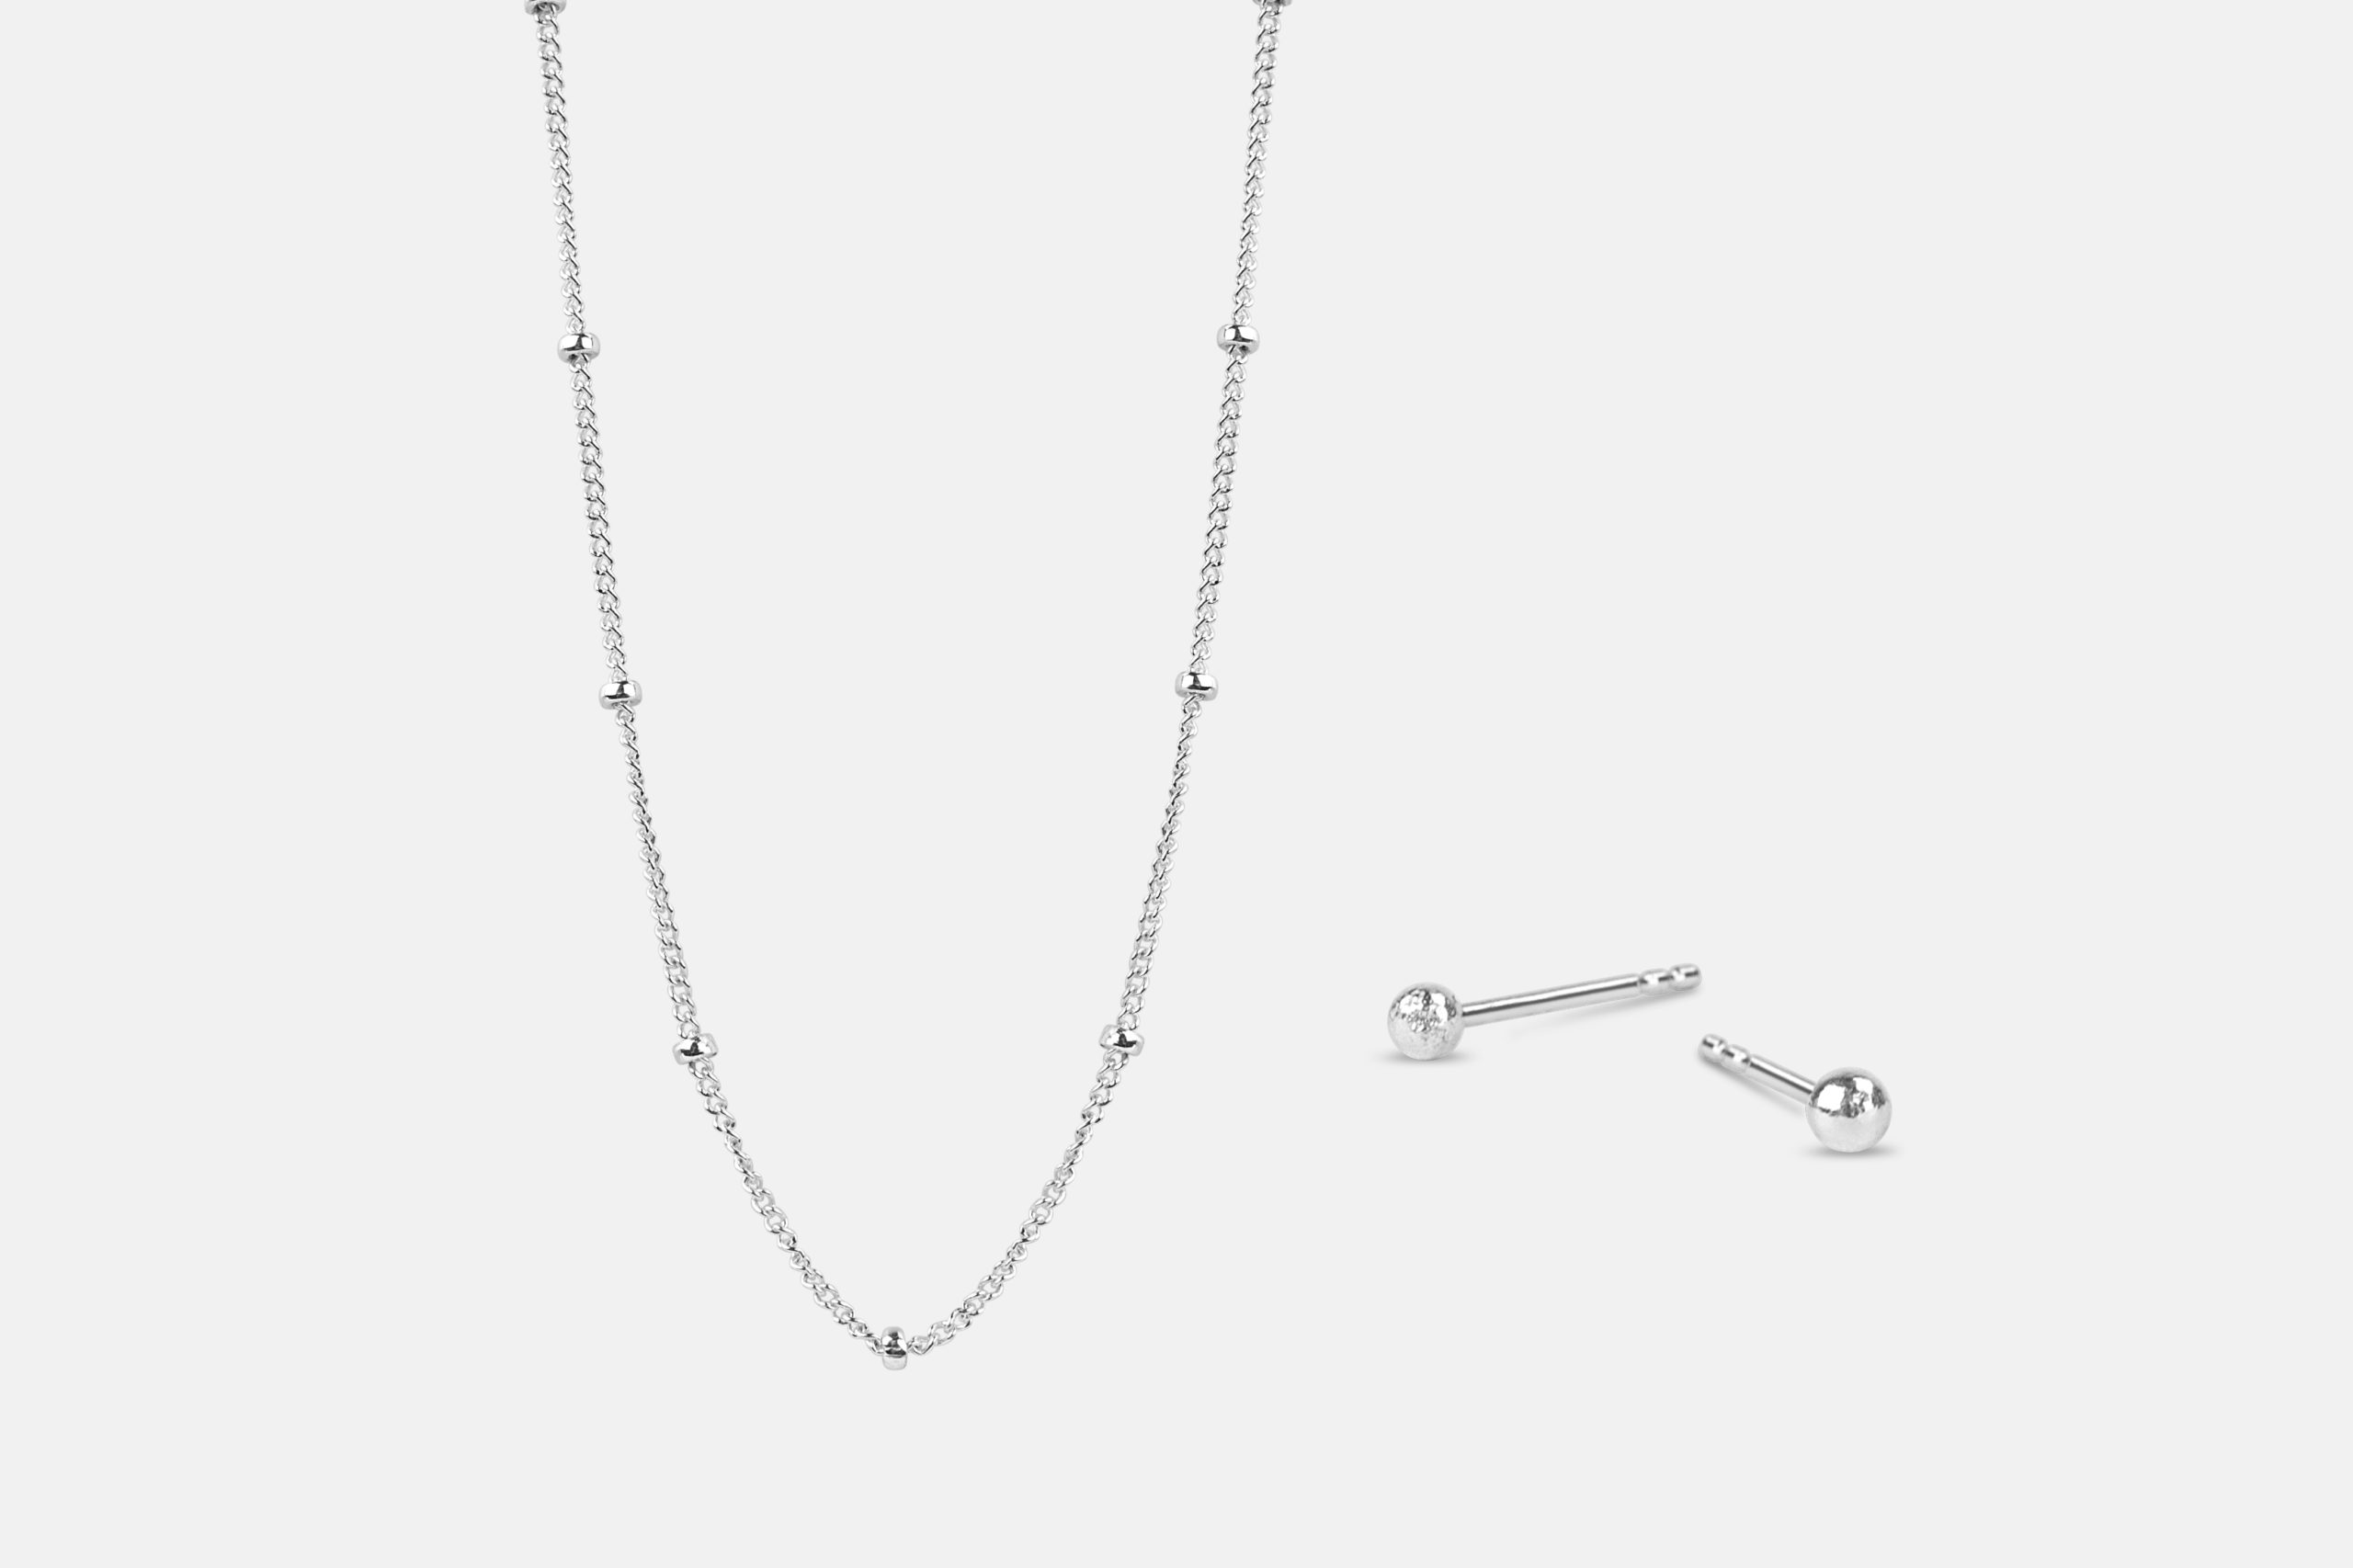 sterling silver bolti necklace and earrings